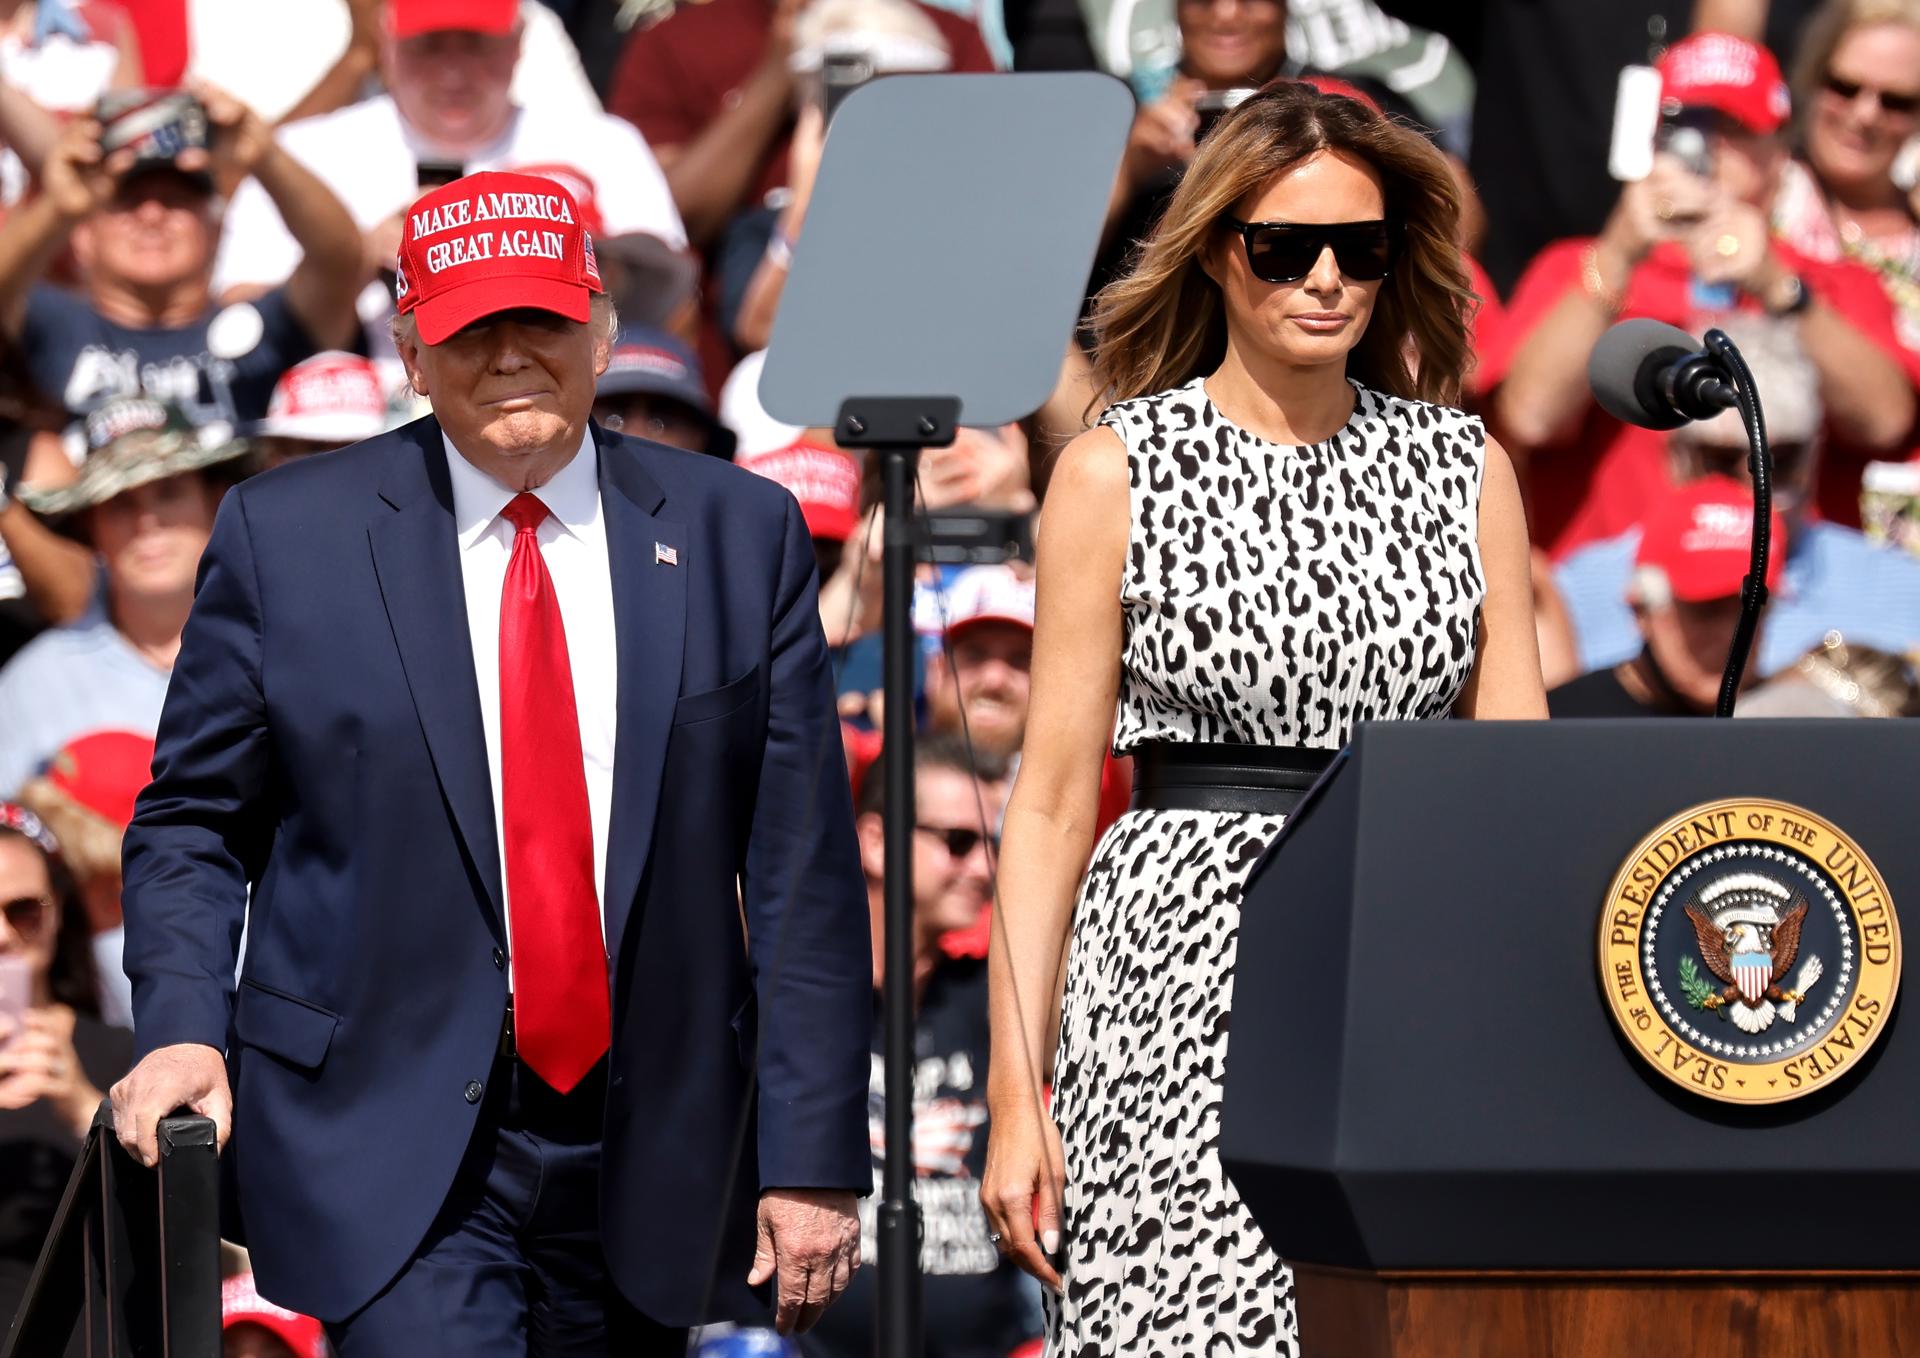 US President Donald J. Trump (L) arrives with his wife, First Lady Melania Trump at the Donald J. Trump's make America great victory rally at Raymond James Stadium in Tampa, Florida, USA, 29 October 2020. EFE-EPA/PETER FOLEY/FILE